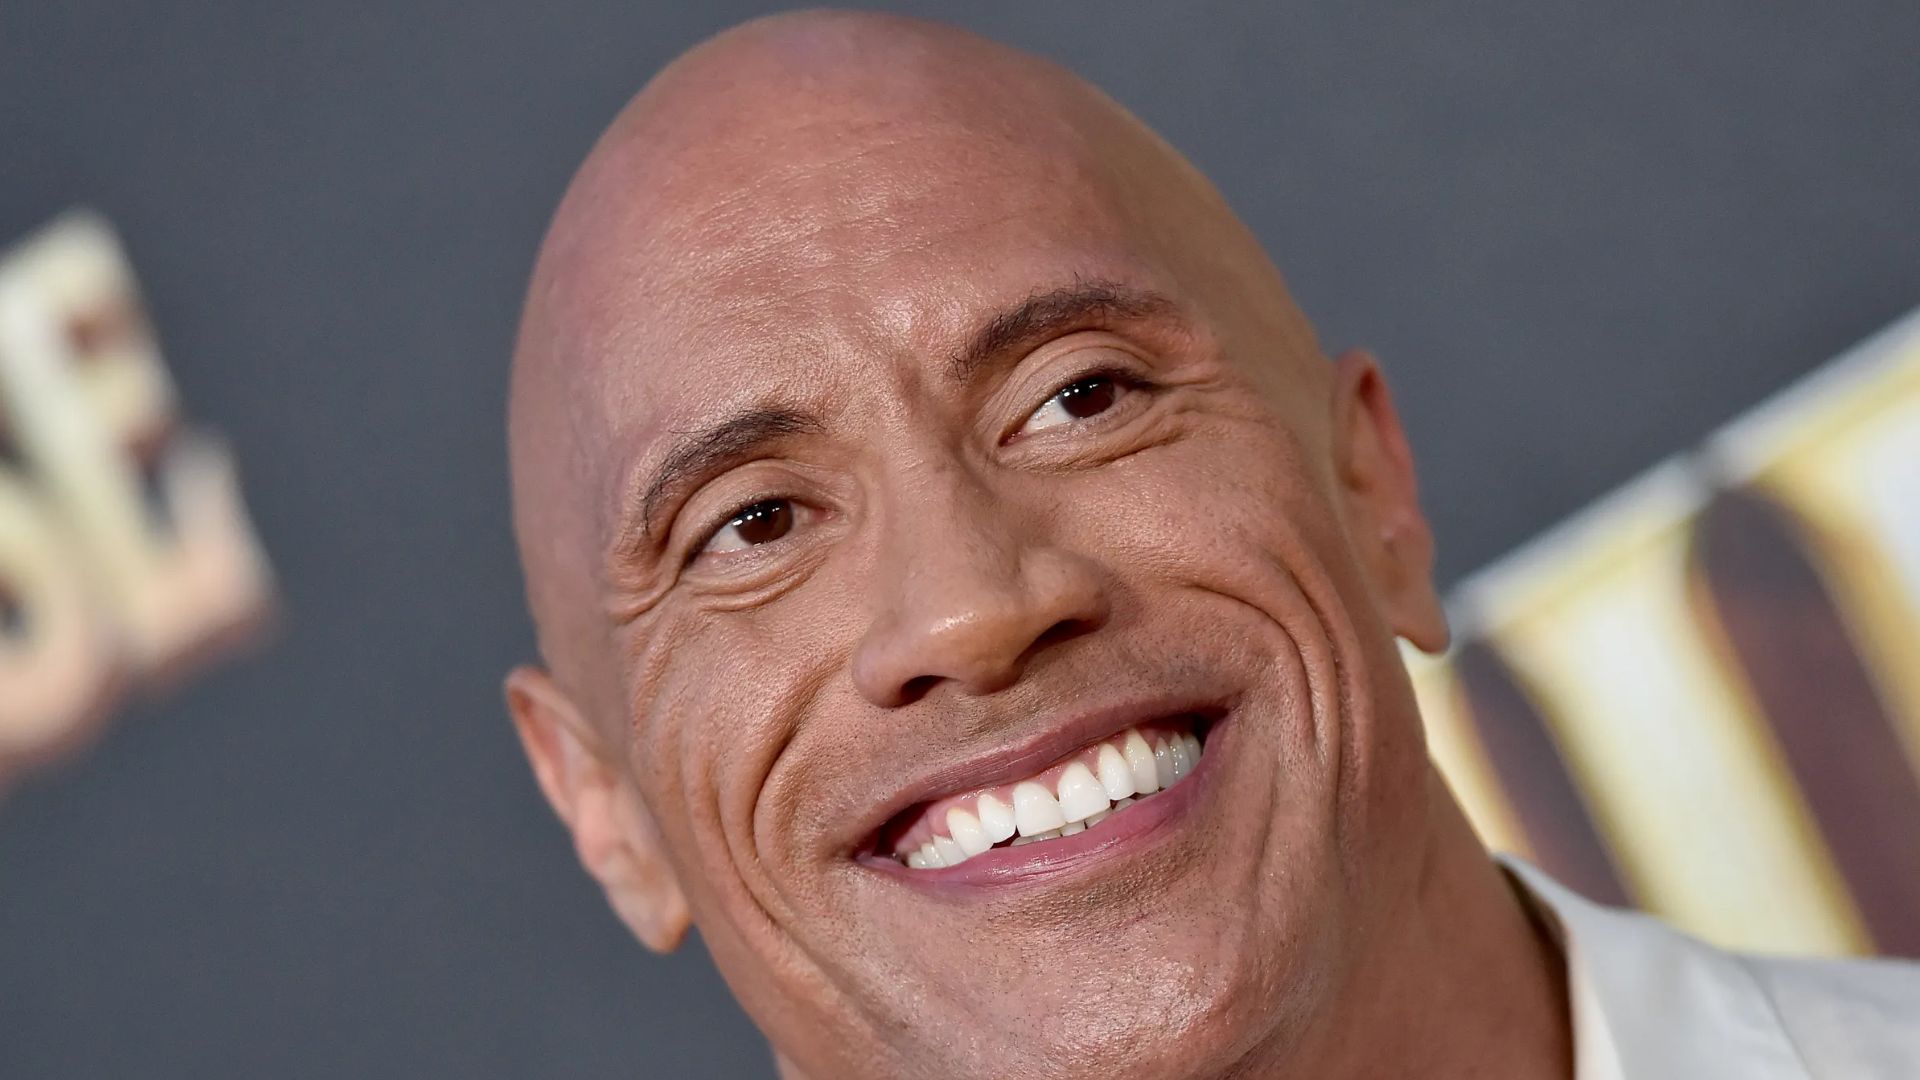 Dwayne "The Rock" Johnson With A Smile